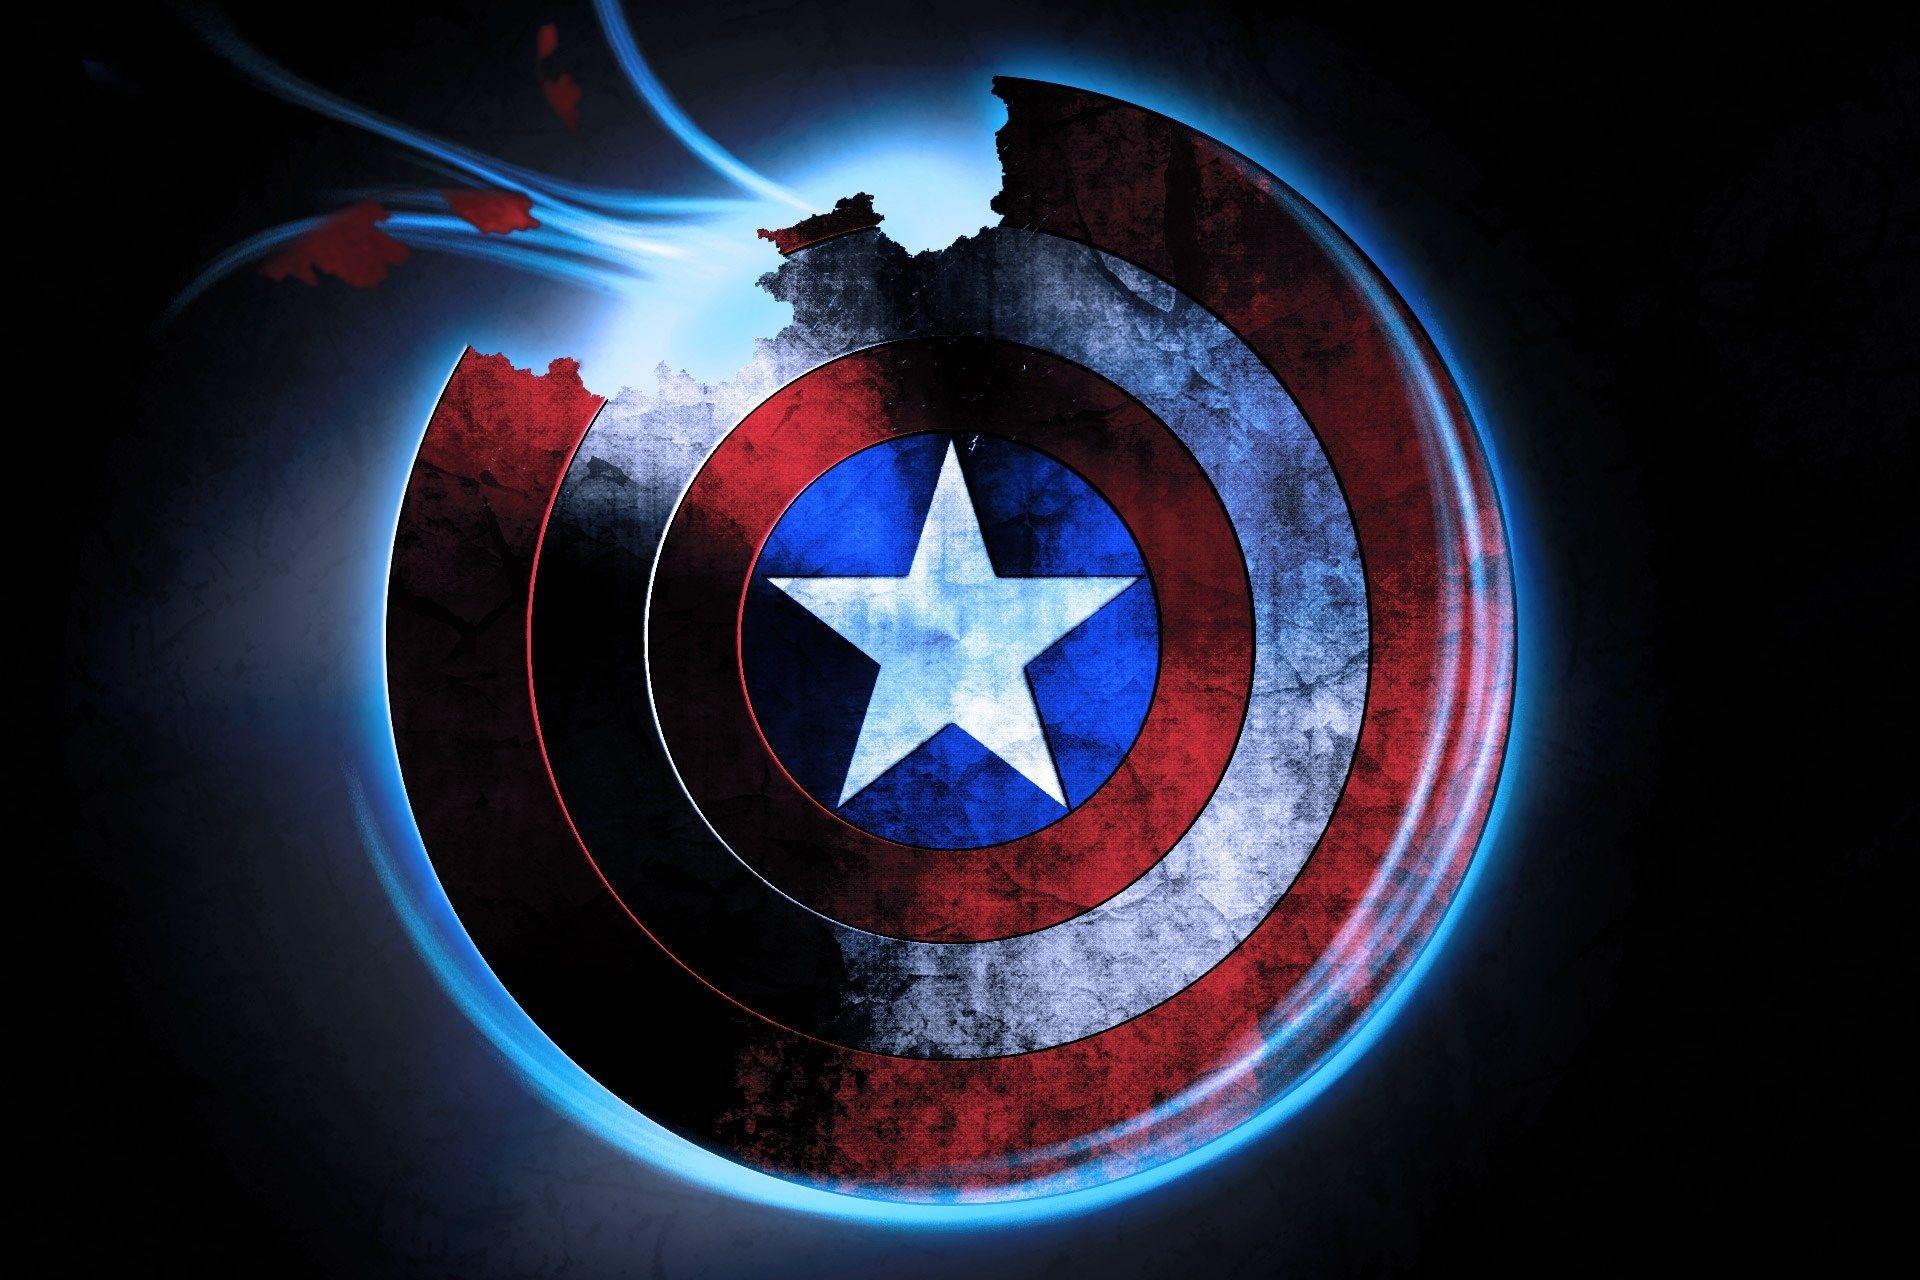 captain america screensavers and background free. Captain america shield wallpaper, Captain america wallpaper, Captain america shield art